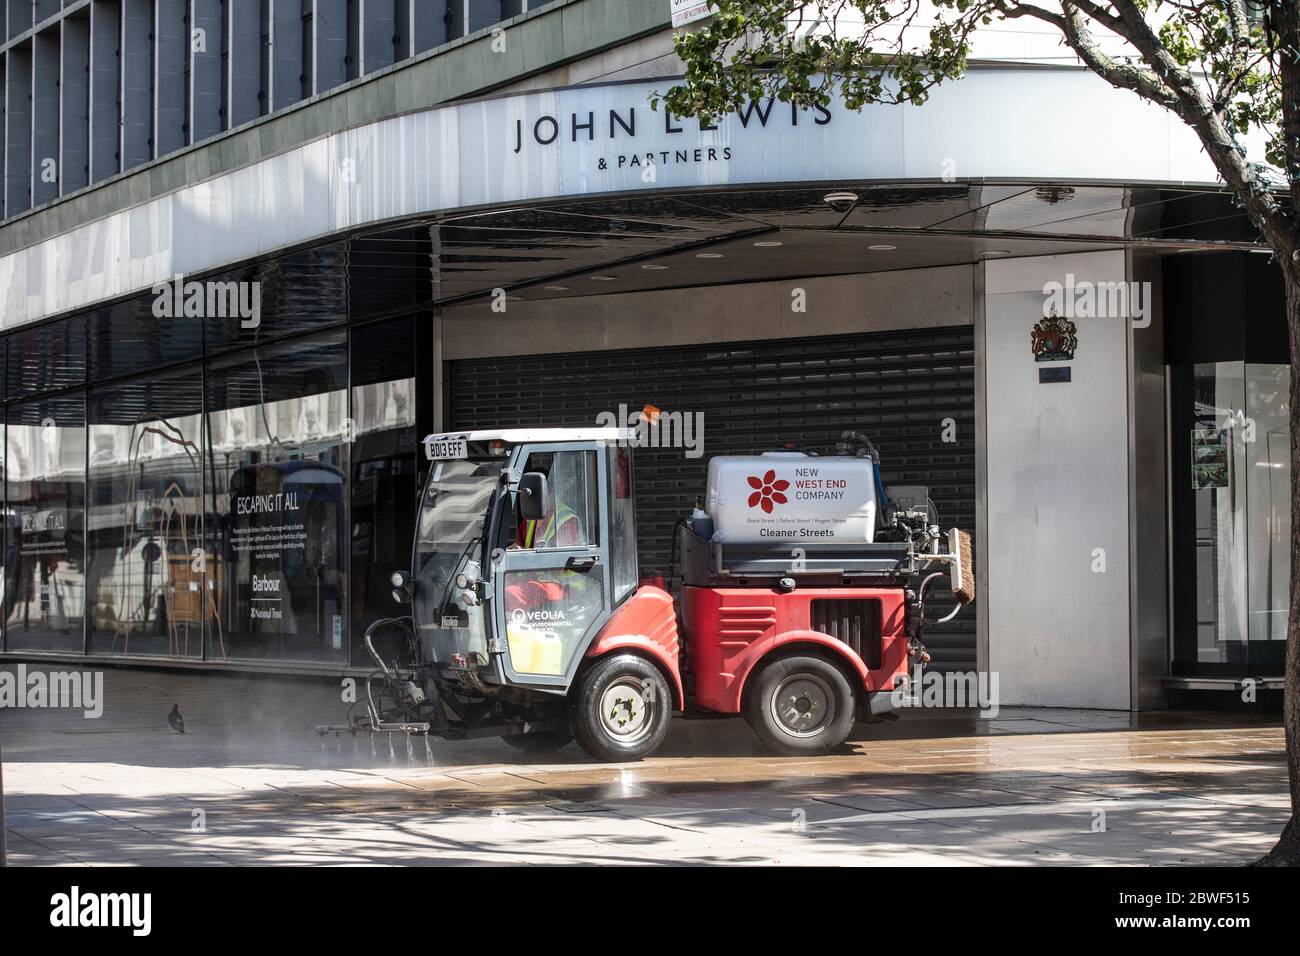 Businesses prepare to reopen on June 15th after the coronavirus lockdown in central London, England, United Kingdom Stock Photo